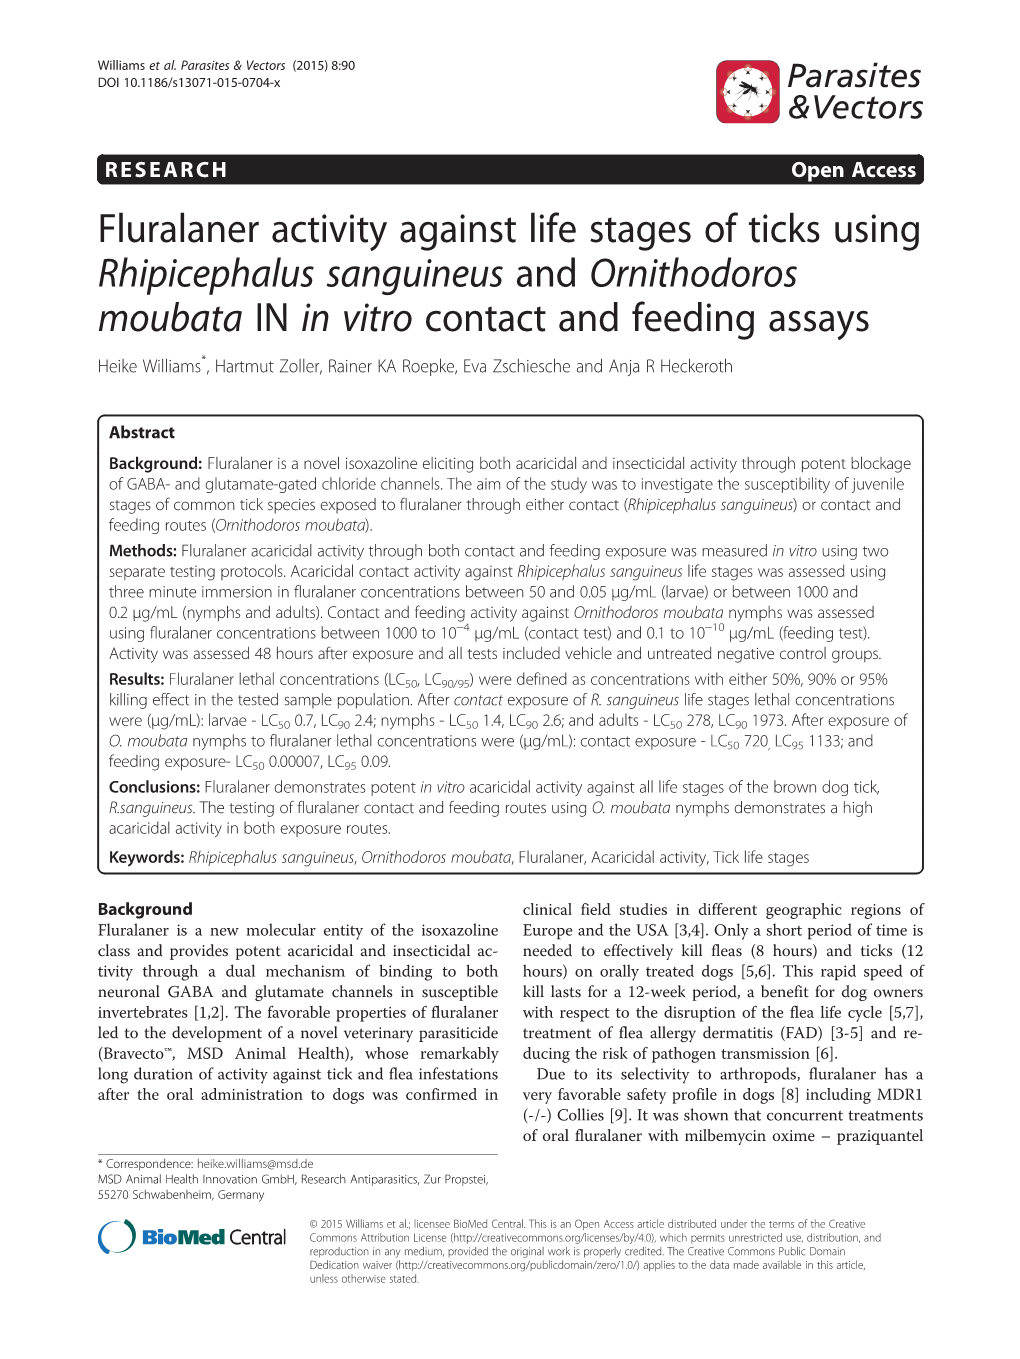 Fluralaner Activity Against Life Stages of Ticks Using Rhipicephalus